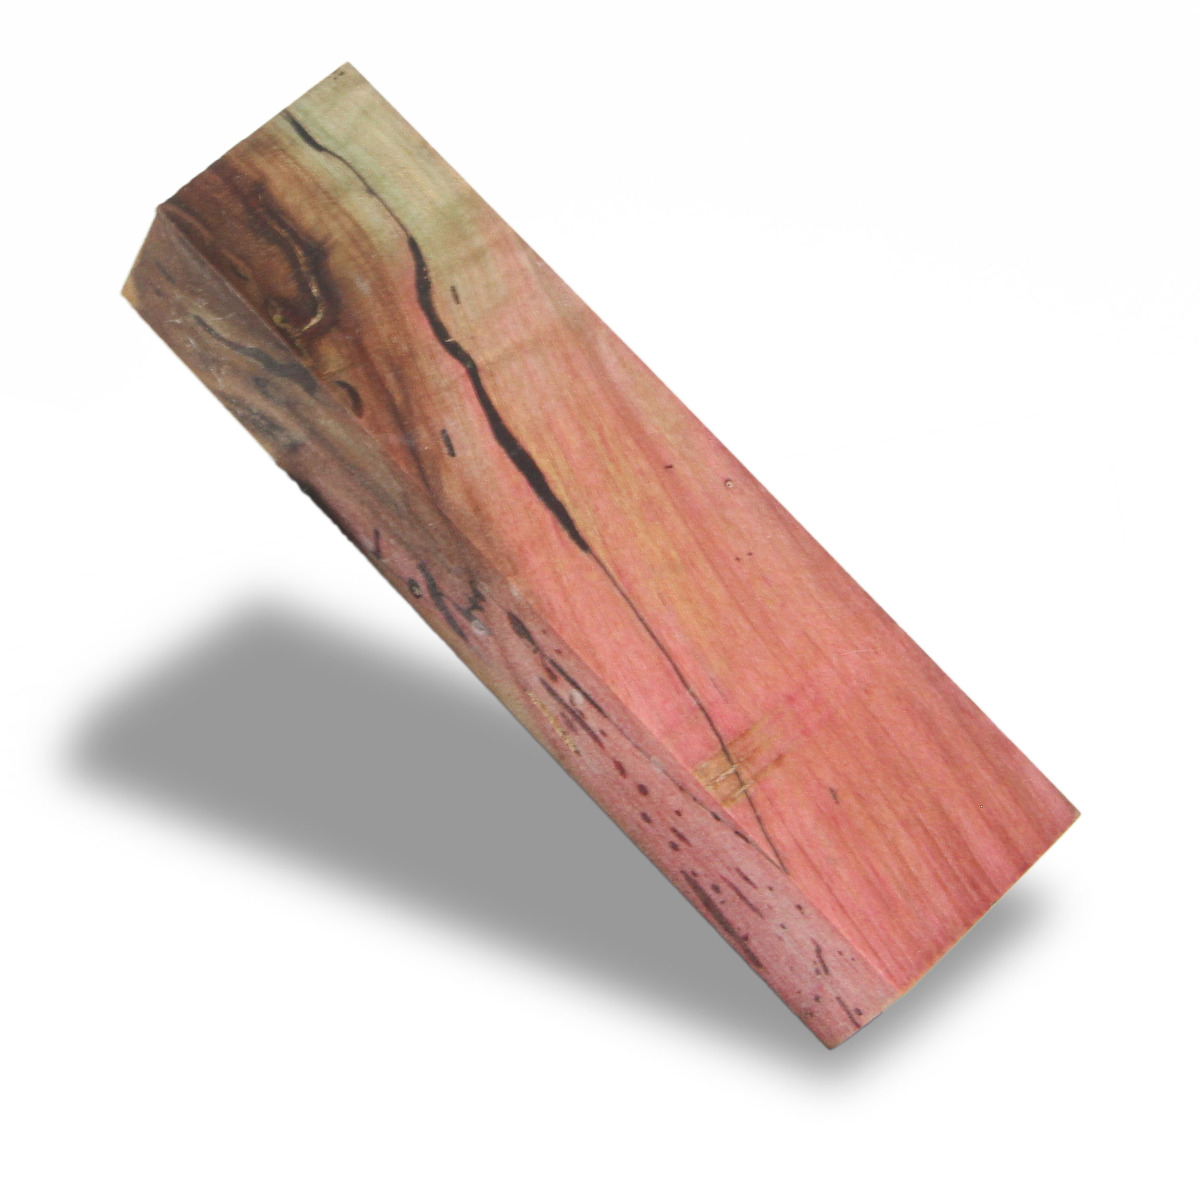 Spalted Maple Black Line Burl Knife Block - Dyed - #4038- 1.55"x 0.85"x 5.55"